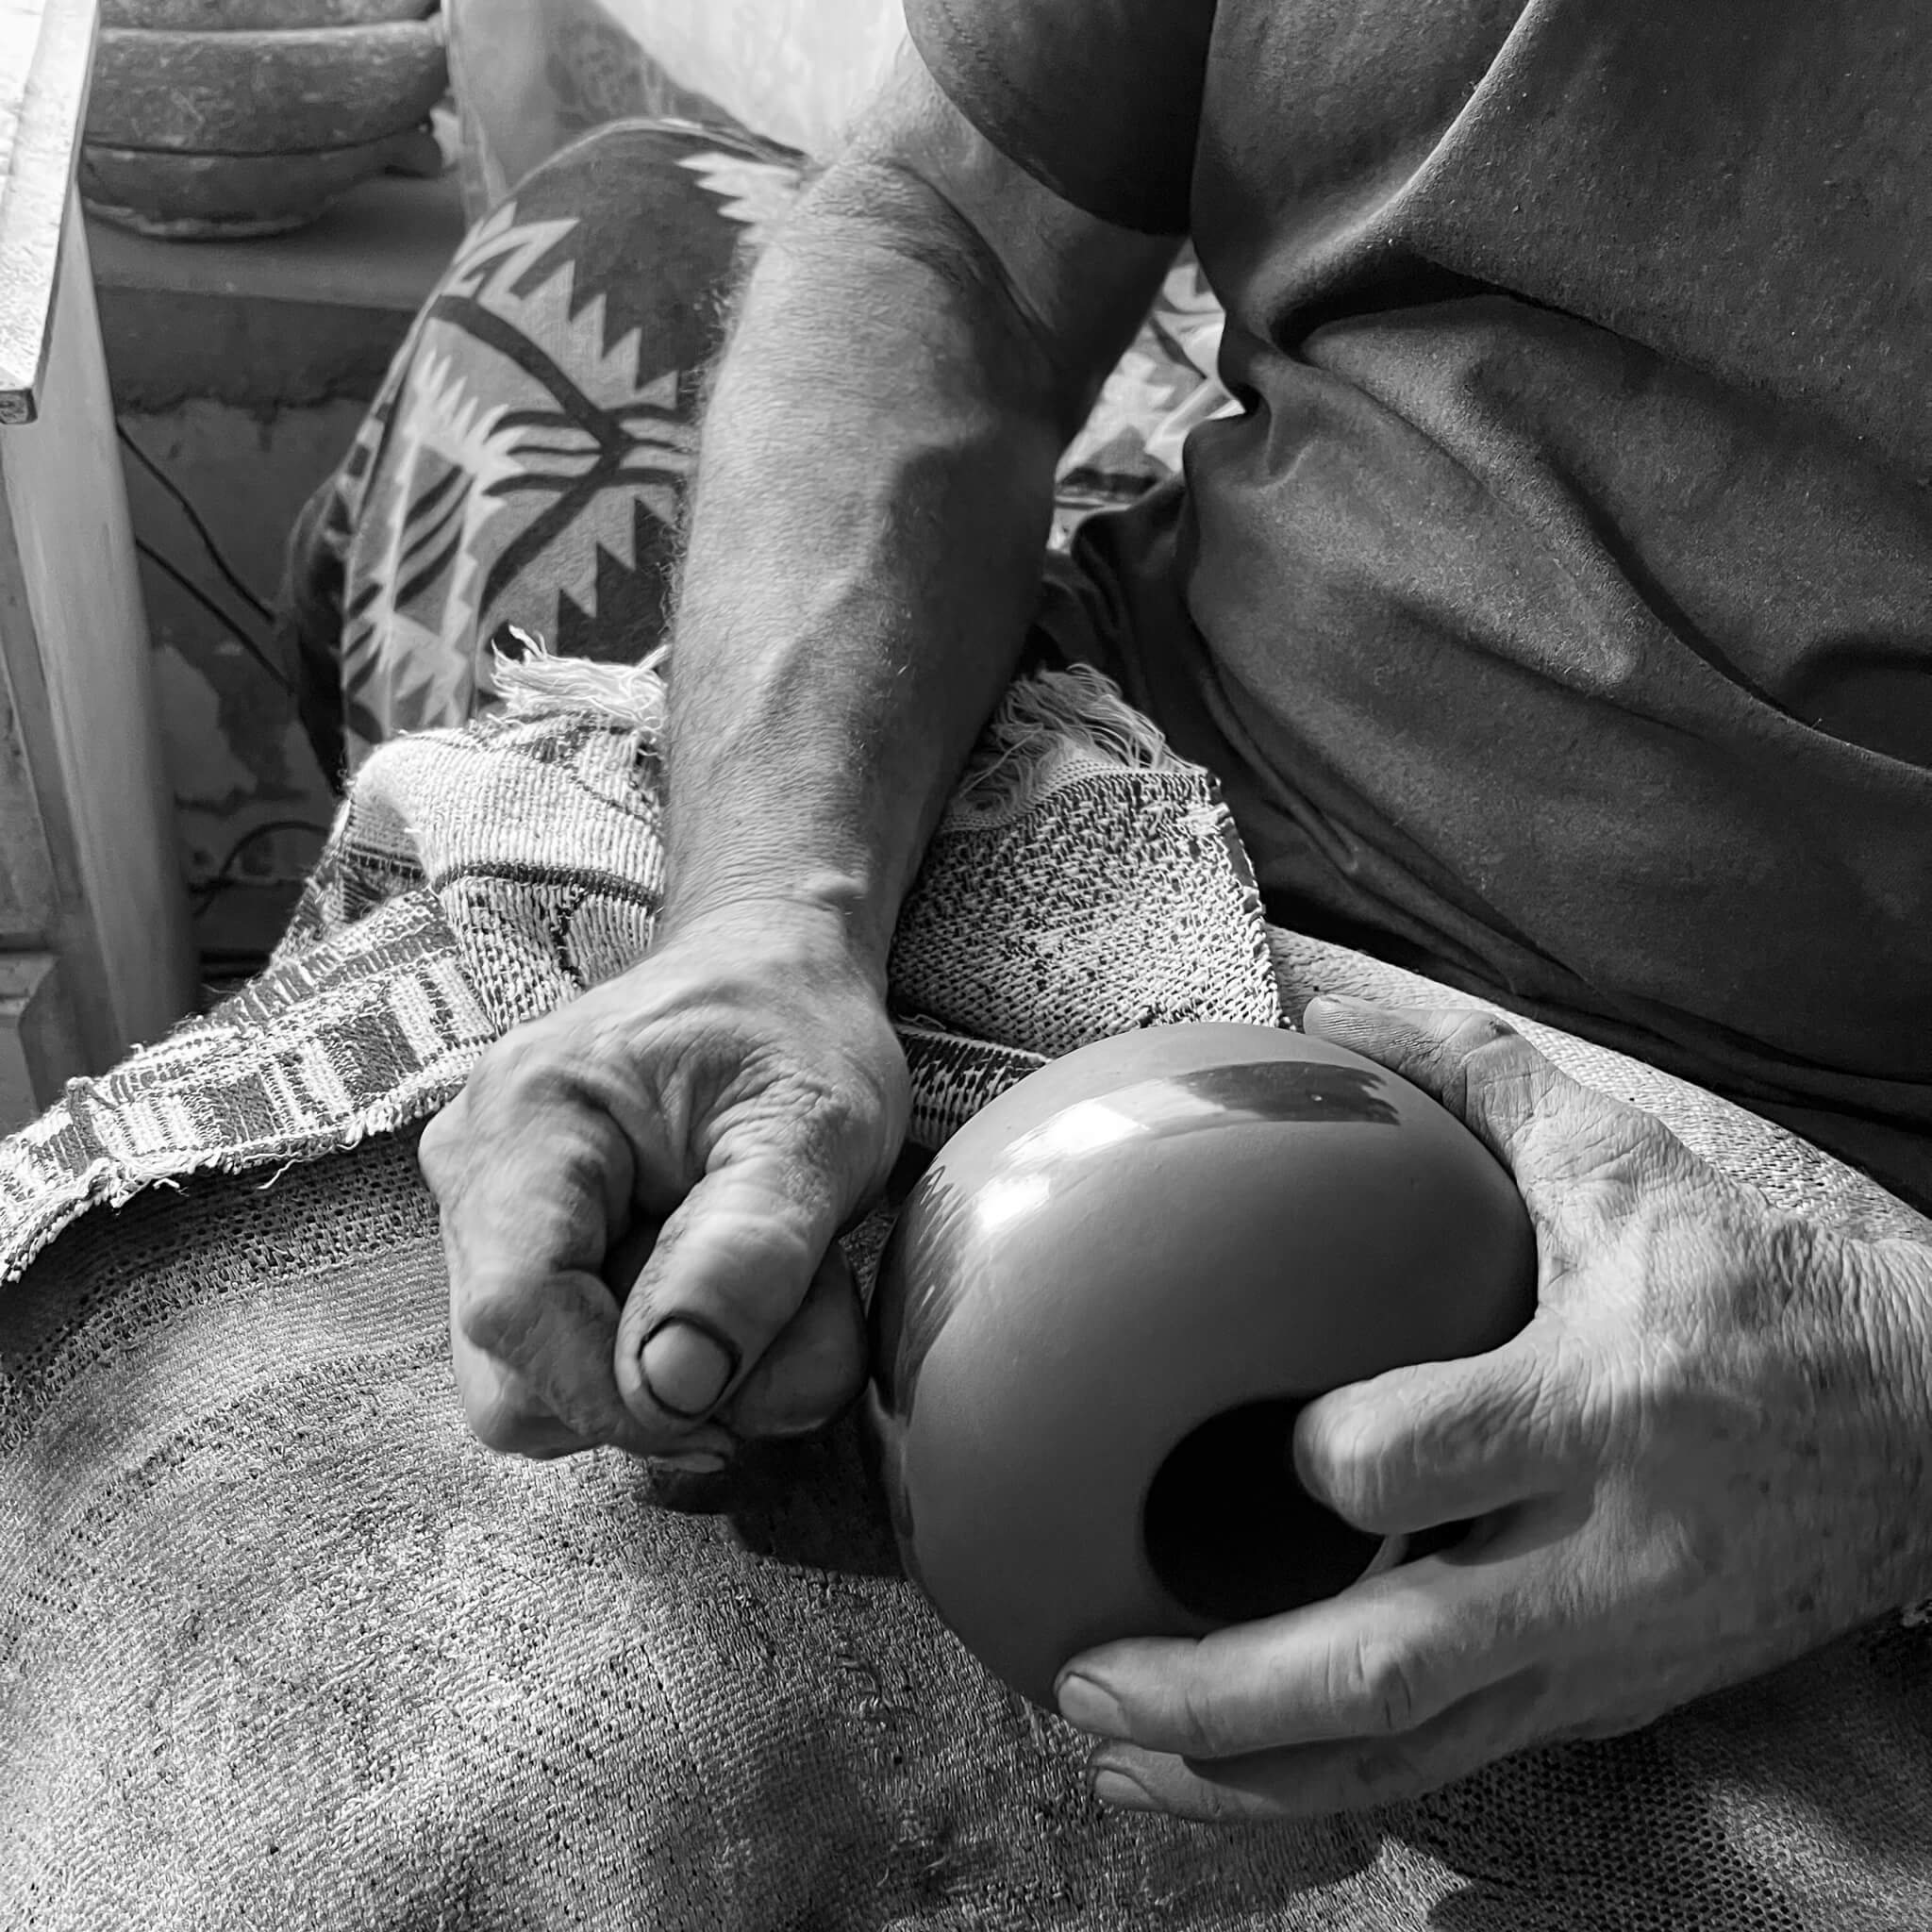 A Mexican artisan hand-burnishing pottery in Mata Ortiz, Mexico.